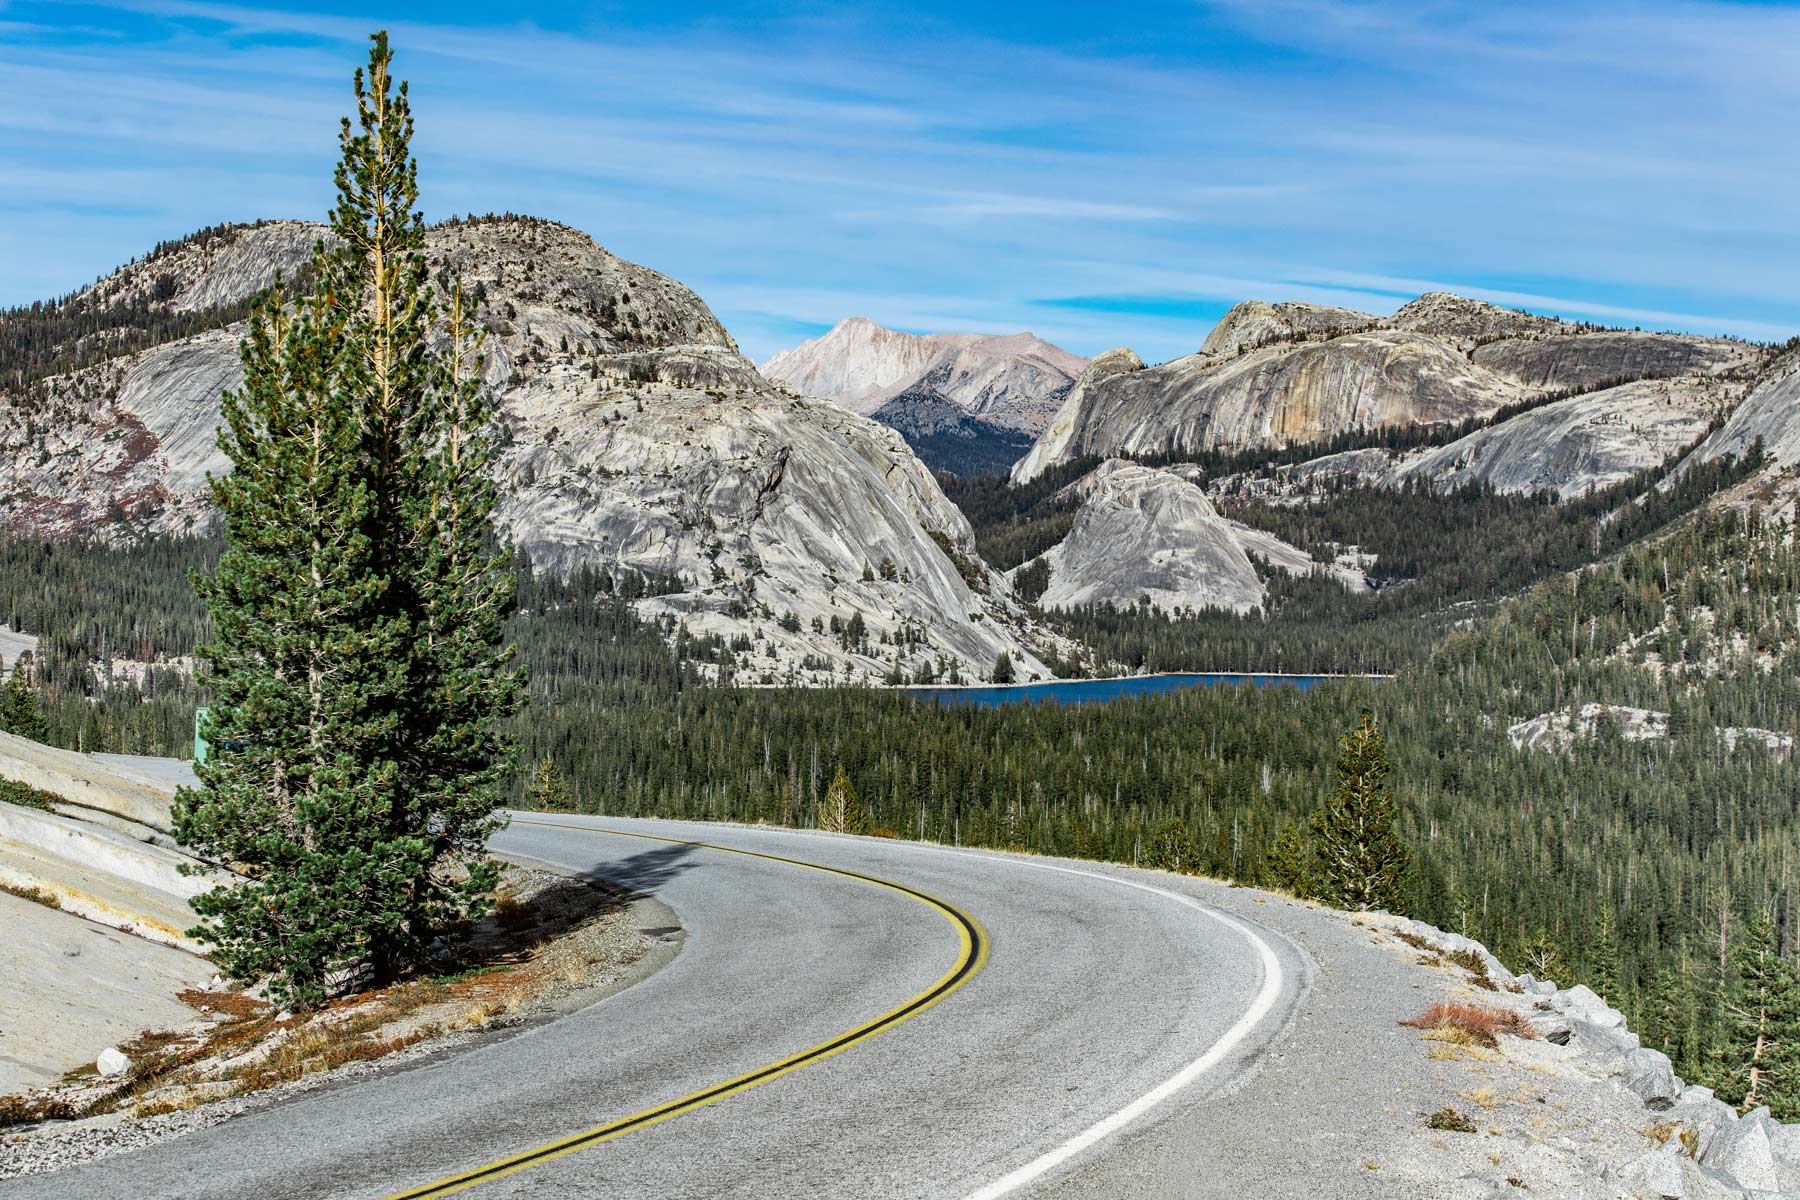 tioga pass, things to do in yosemite national park